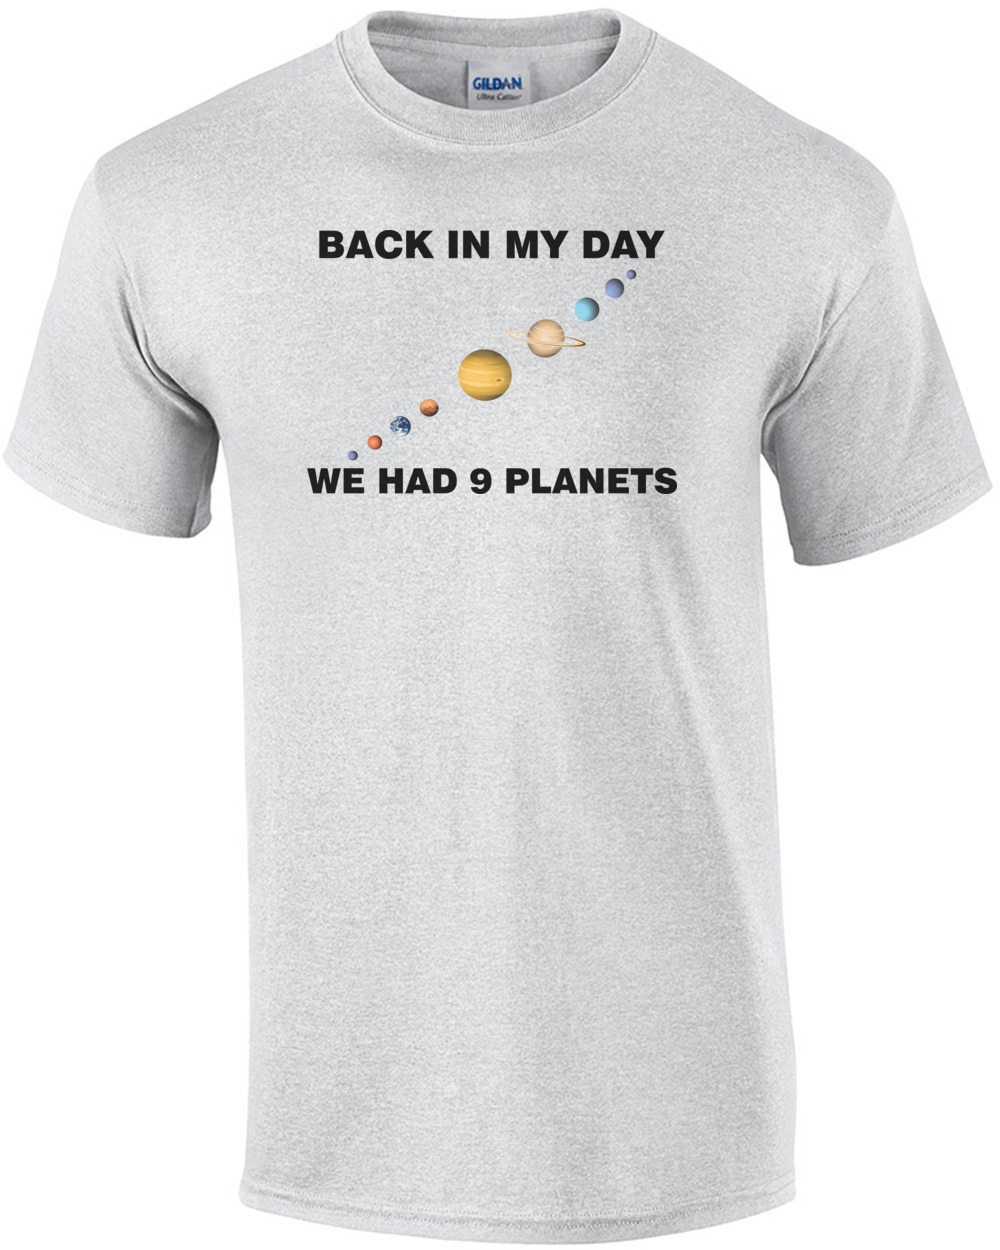 there are 9 planets